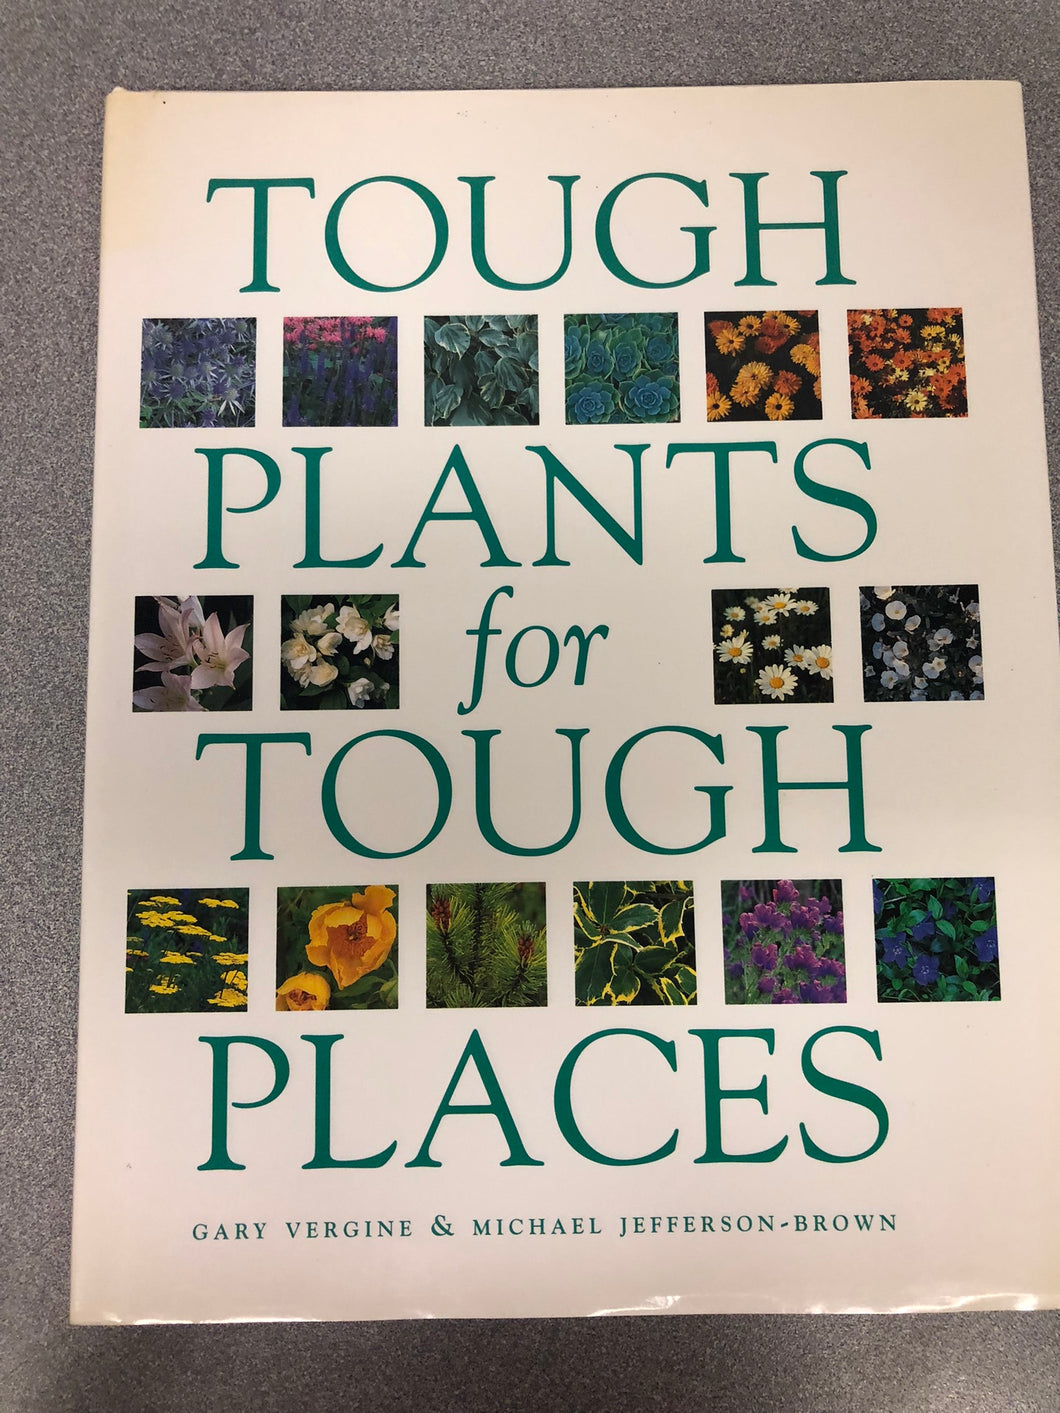 Tough Plants for Tough Places, Vergine, Gary and Michael Jefferson-Brown, [1997] G 8/22